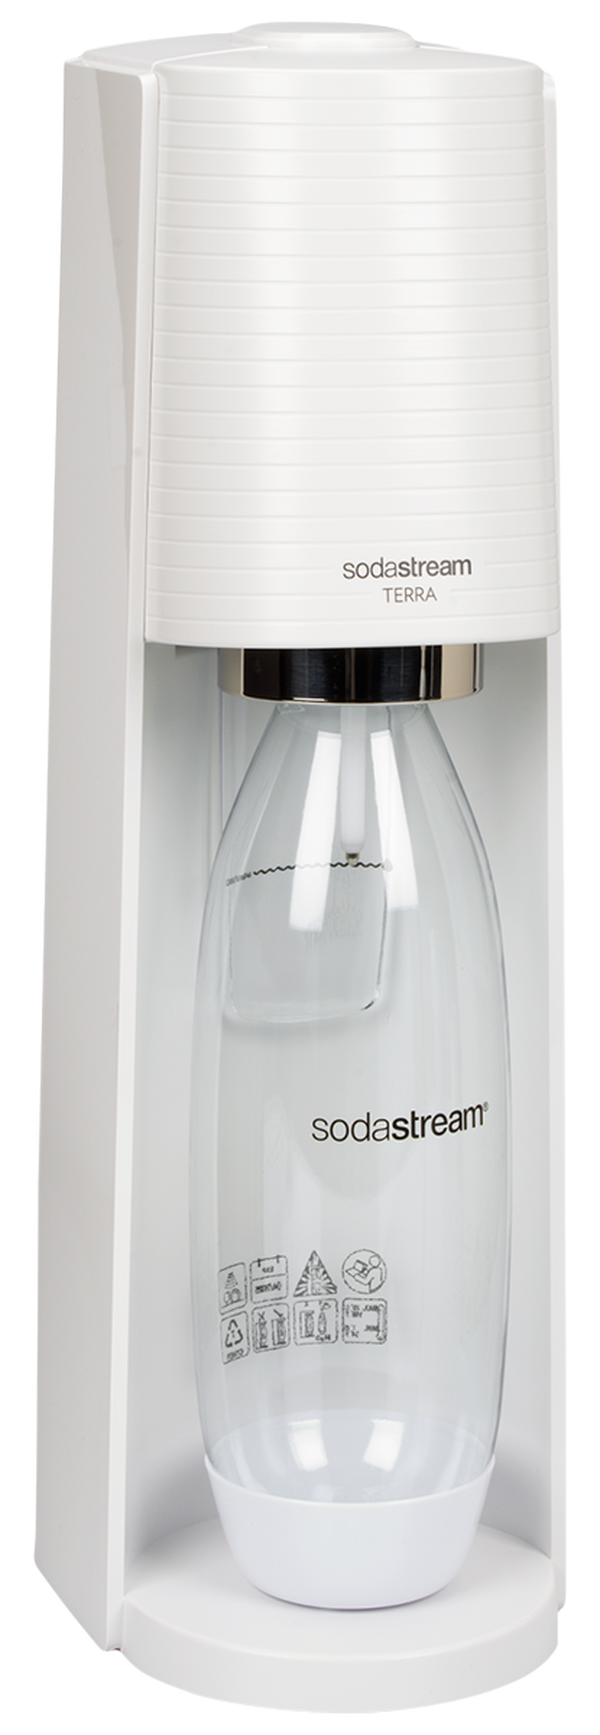 SodaStream Terra Sparkling Water Maker
Assorted colours #1012811110/1/3